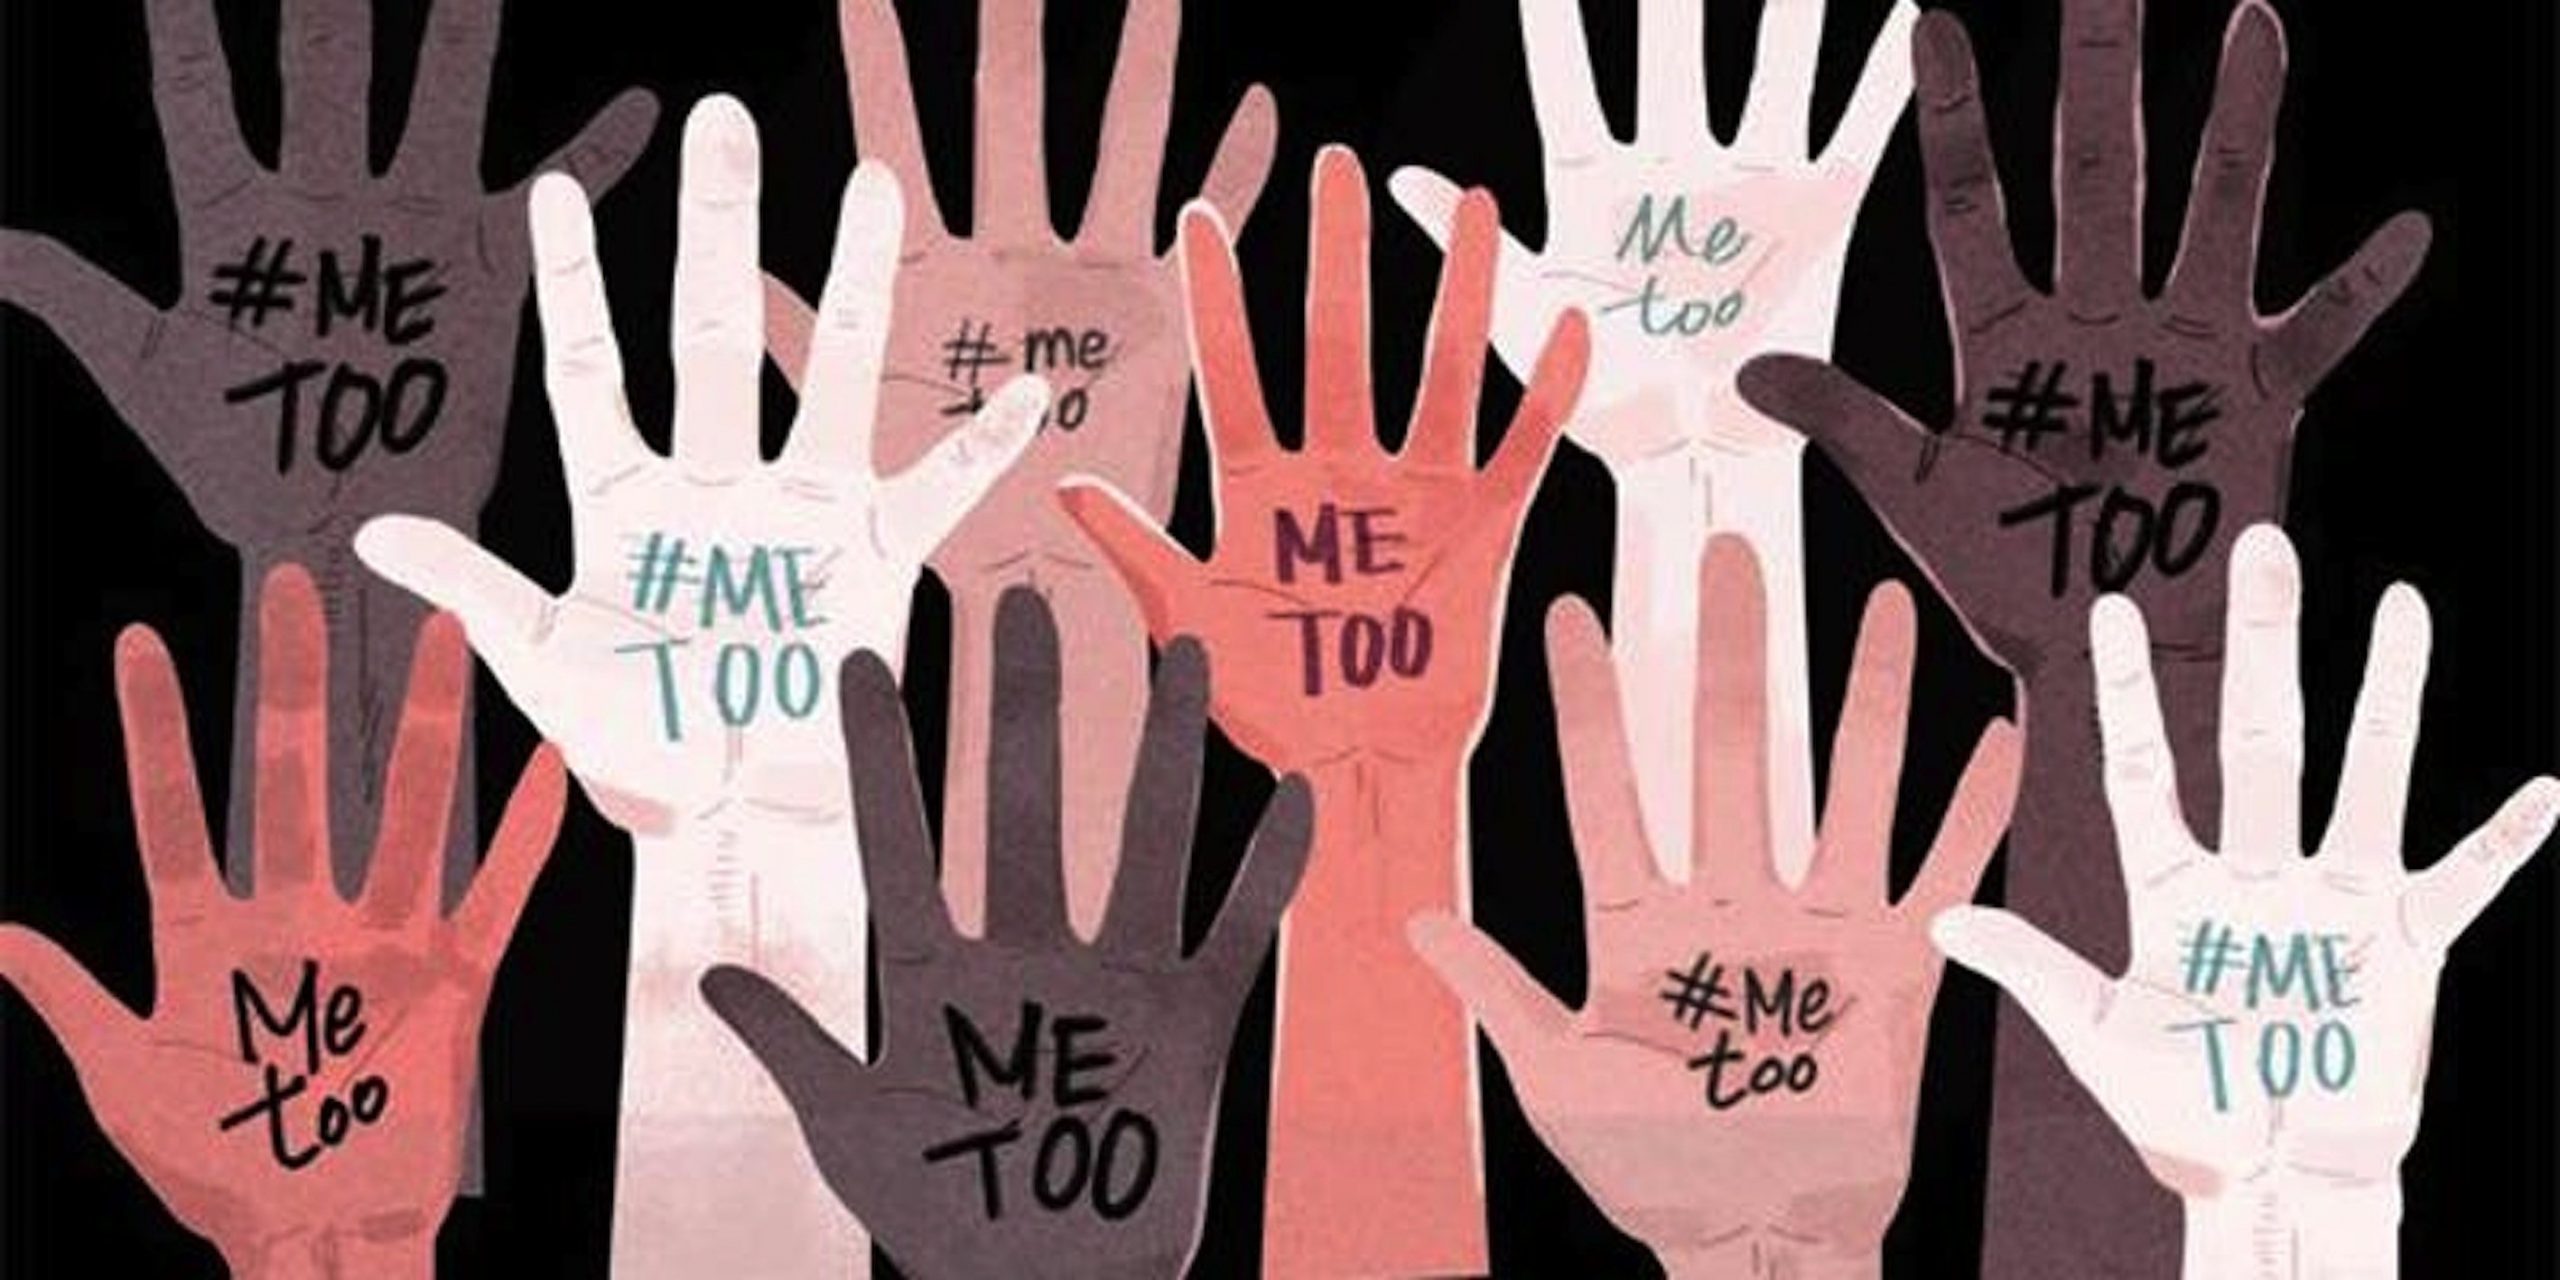 Defamation Law is Being Weaponised to Destroy the Global #MeToo Movement: Can Free Speech Protections Help Counter the Impact? – The Leaflet